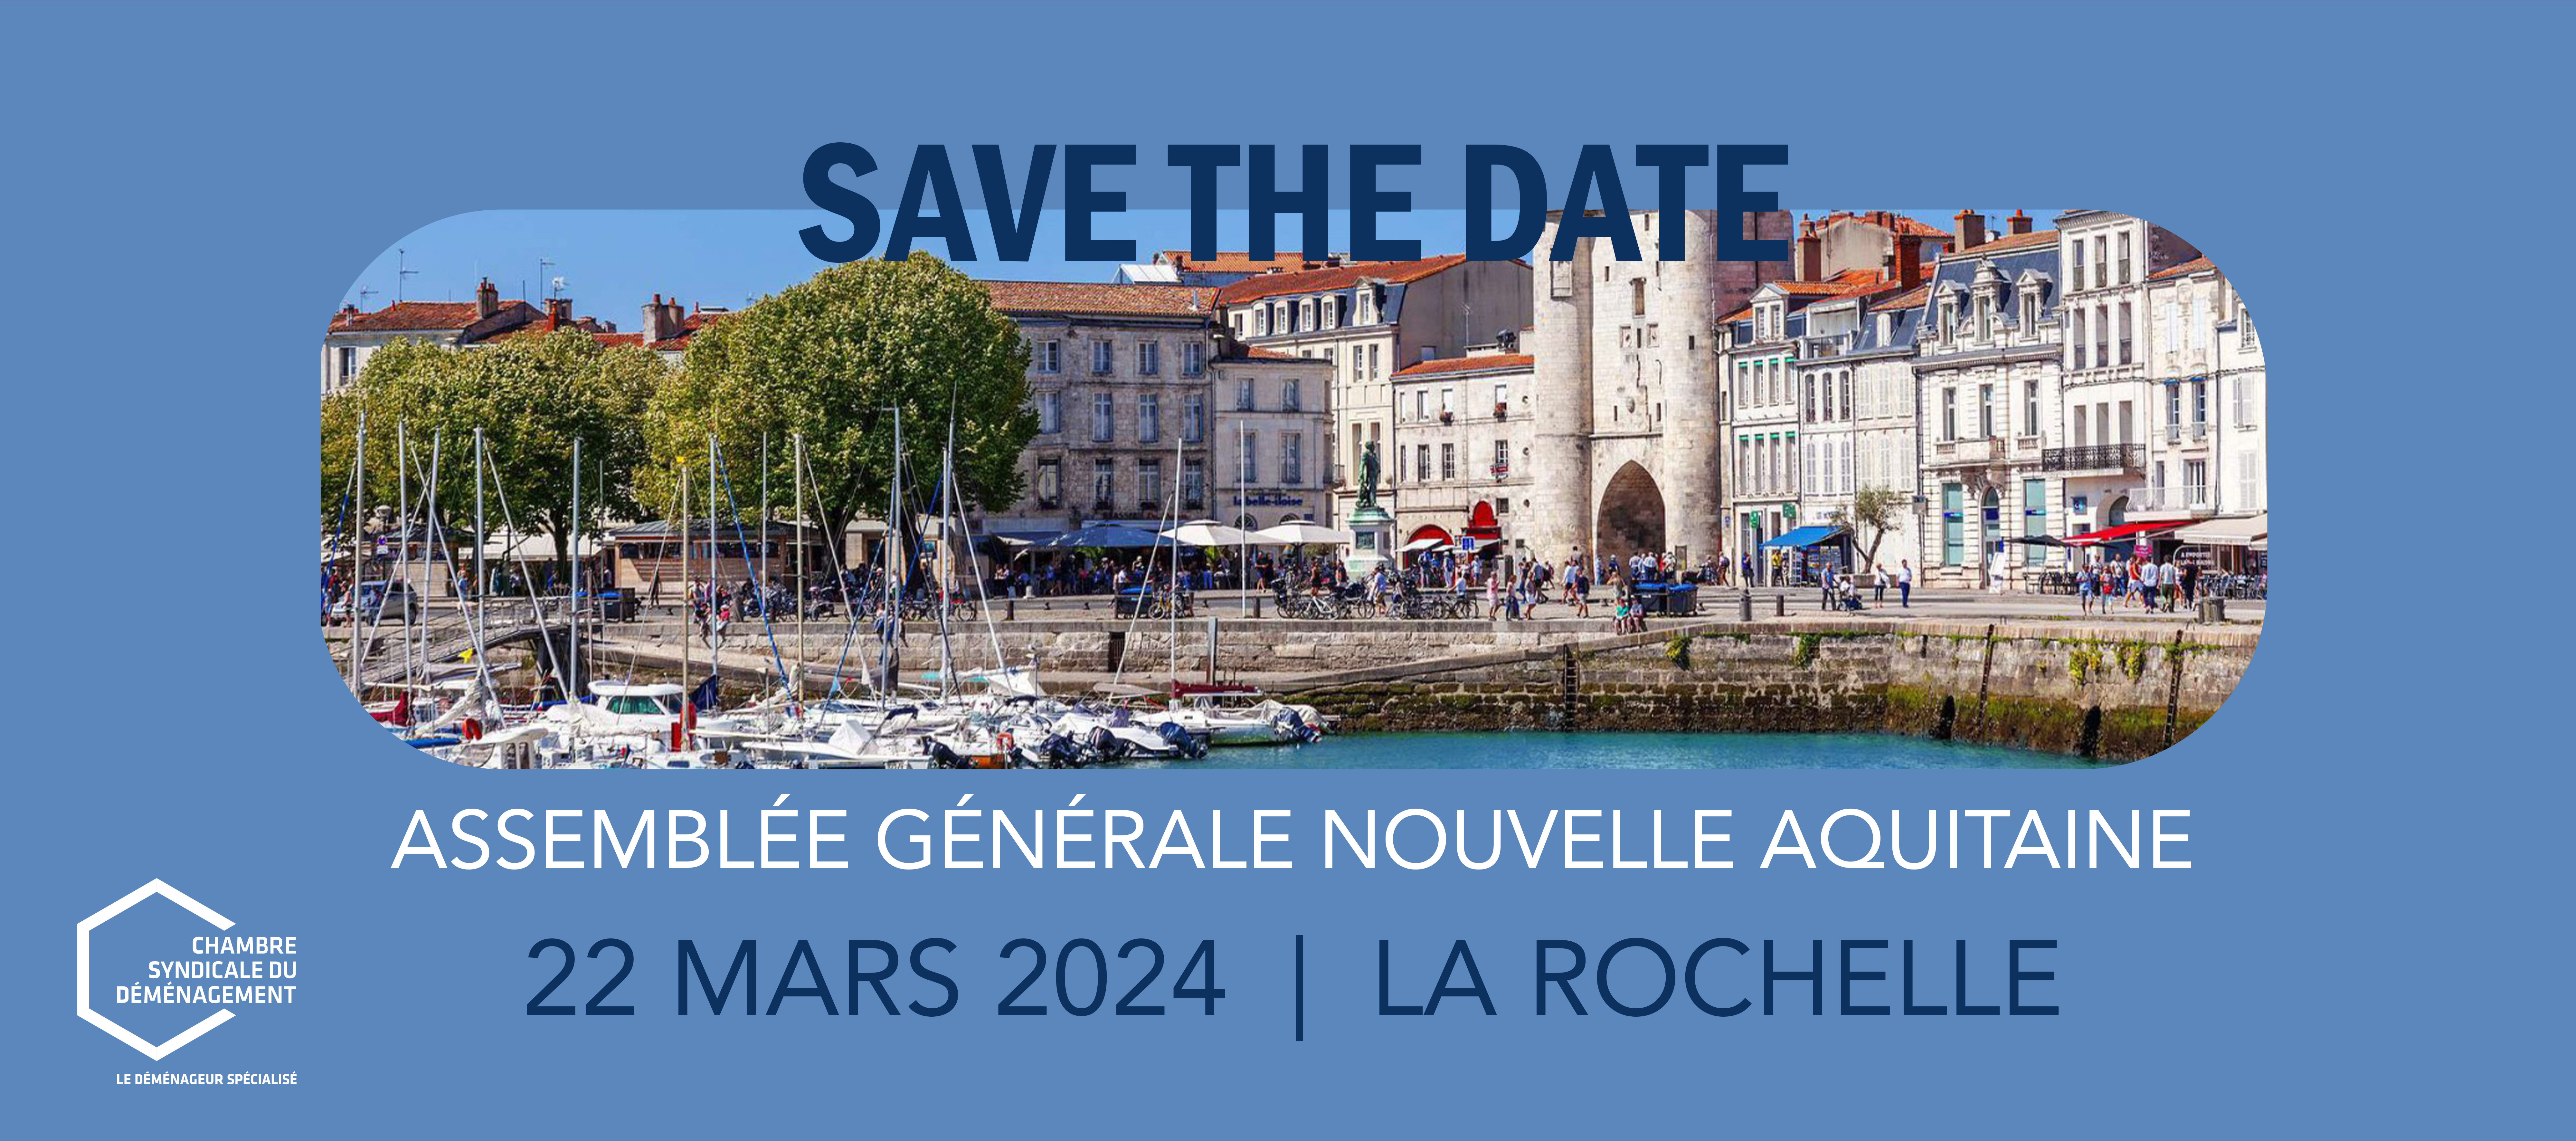 Save the date Nouvelle Aquitaine 2024